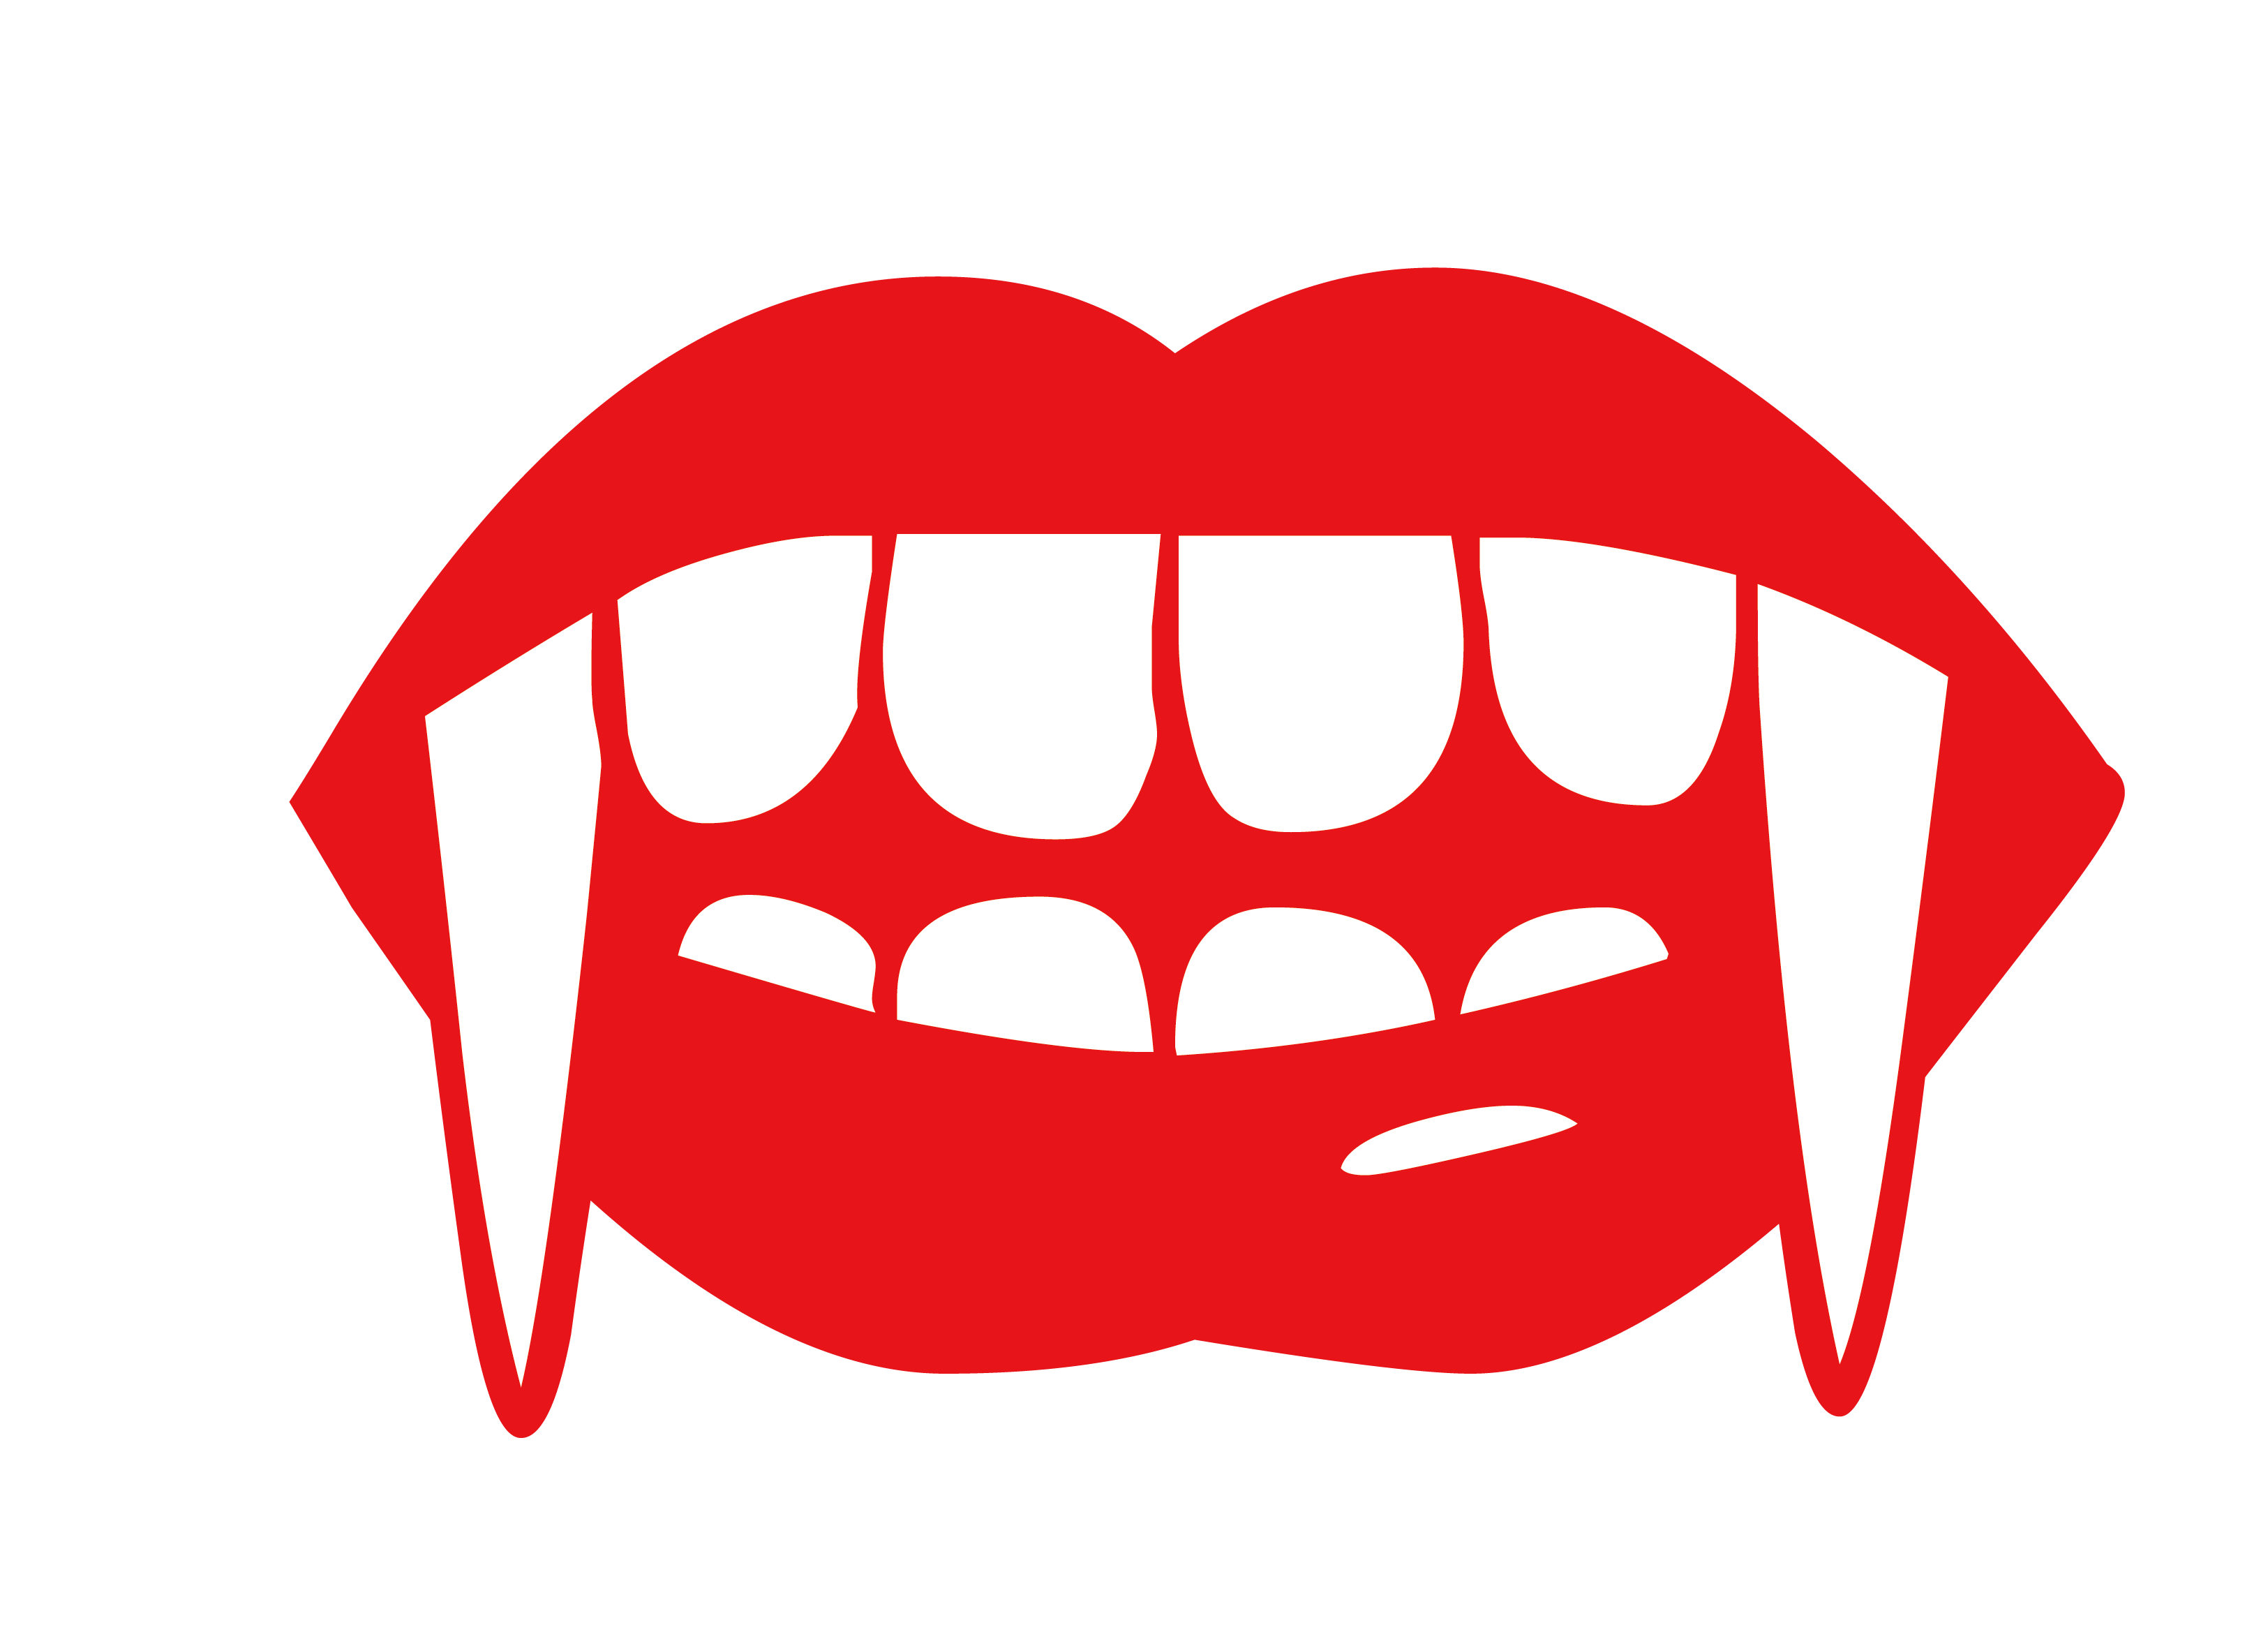 clipart mouth vampire